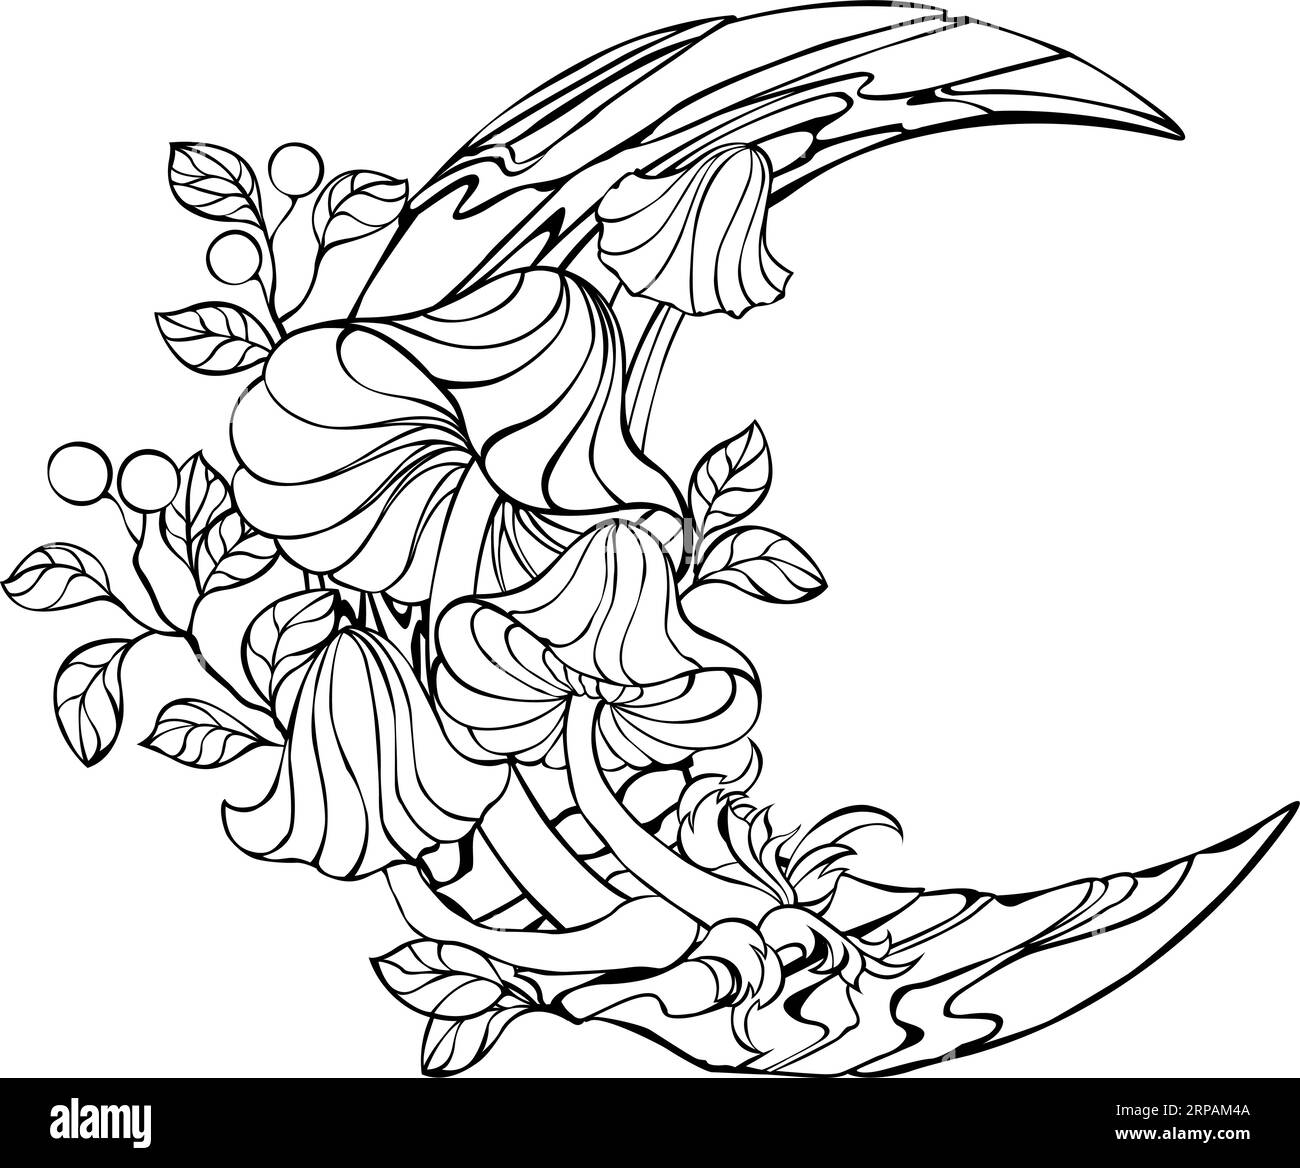 Contour wooden crescent with contour, artistically drawn mushrooms and lingonberry sprigs growing on it on white background. Coloring book. Mystical b Stock Vector